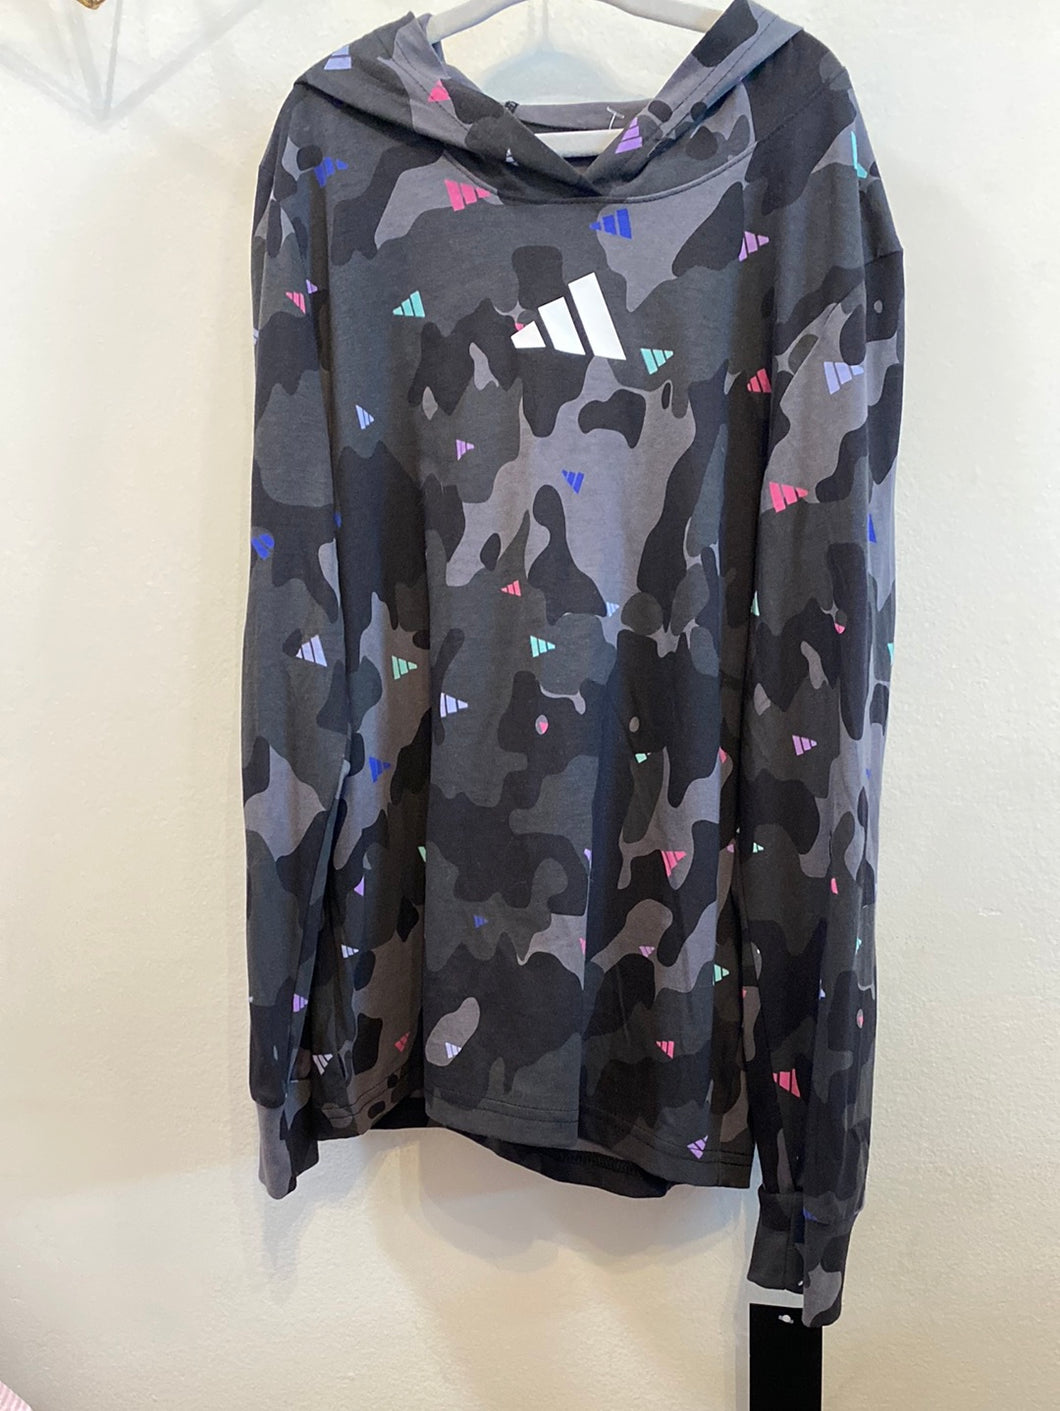 NWT Adidas size 8 top